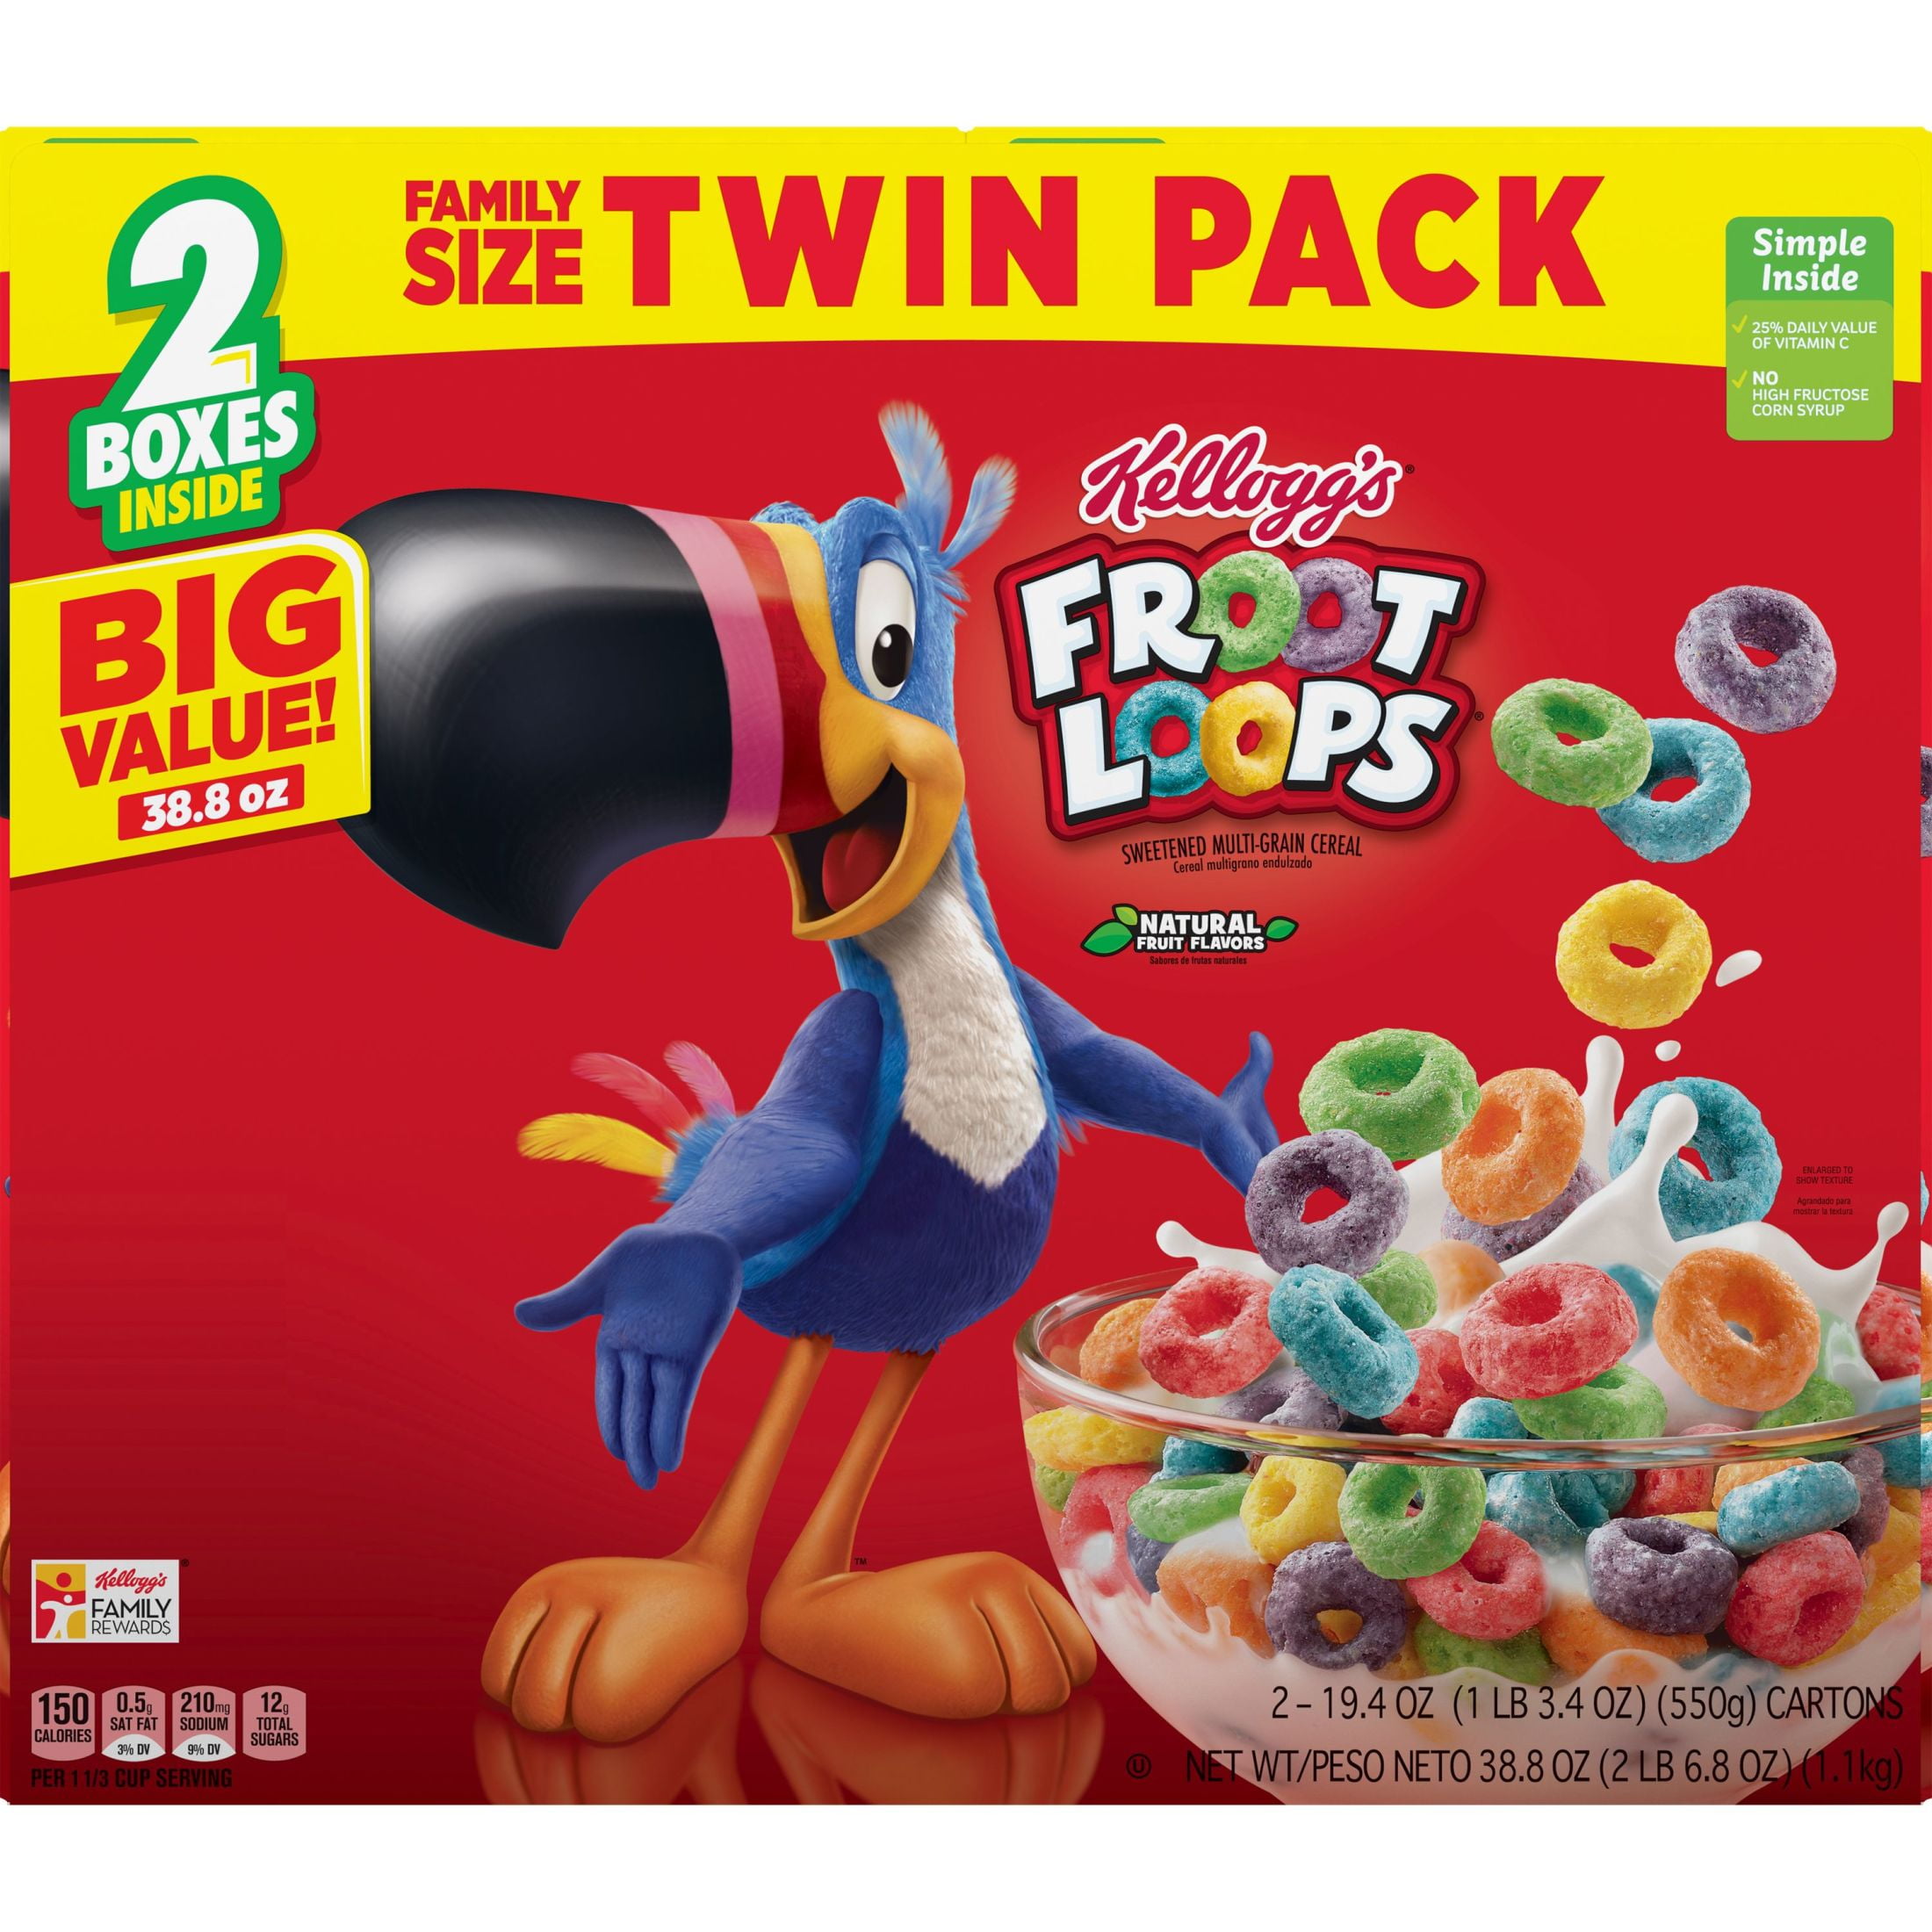  Kellogg's Froot Loops Breakfast Cereal, Fruit Flavored,  Breakfast Snacks with Vitamin C, Family Size, Original, 19.4oz Box (1 Box)